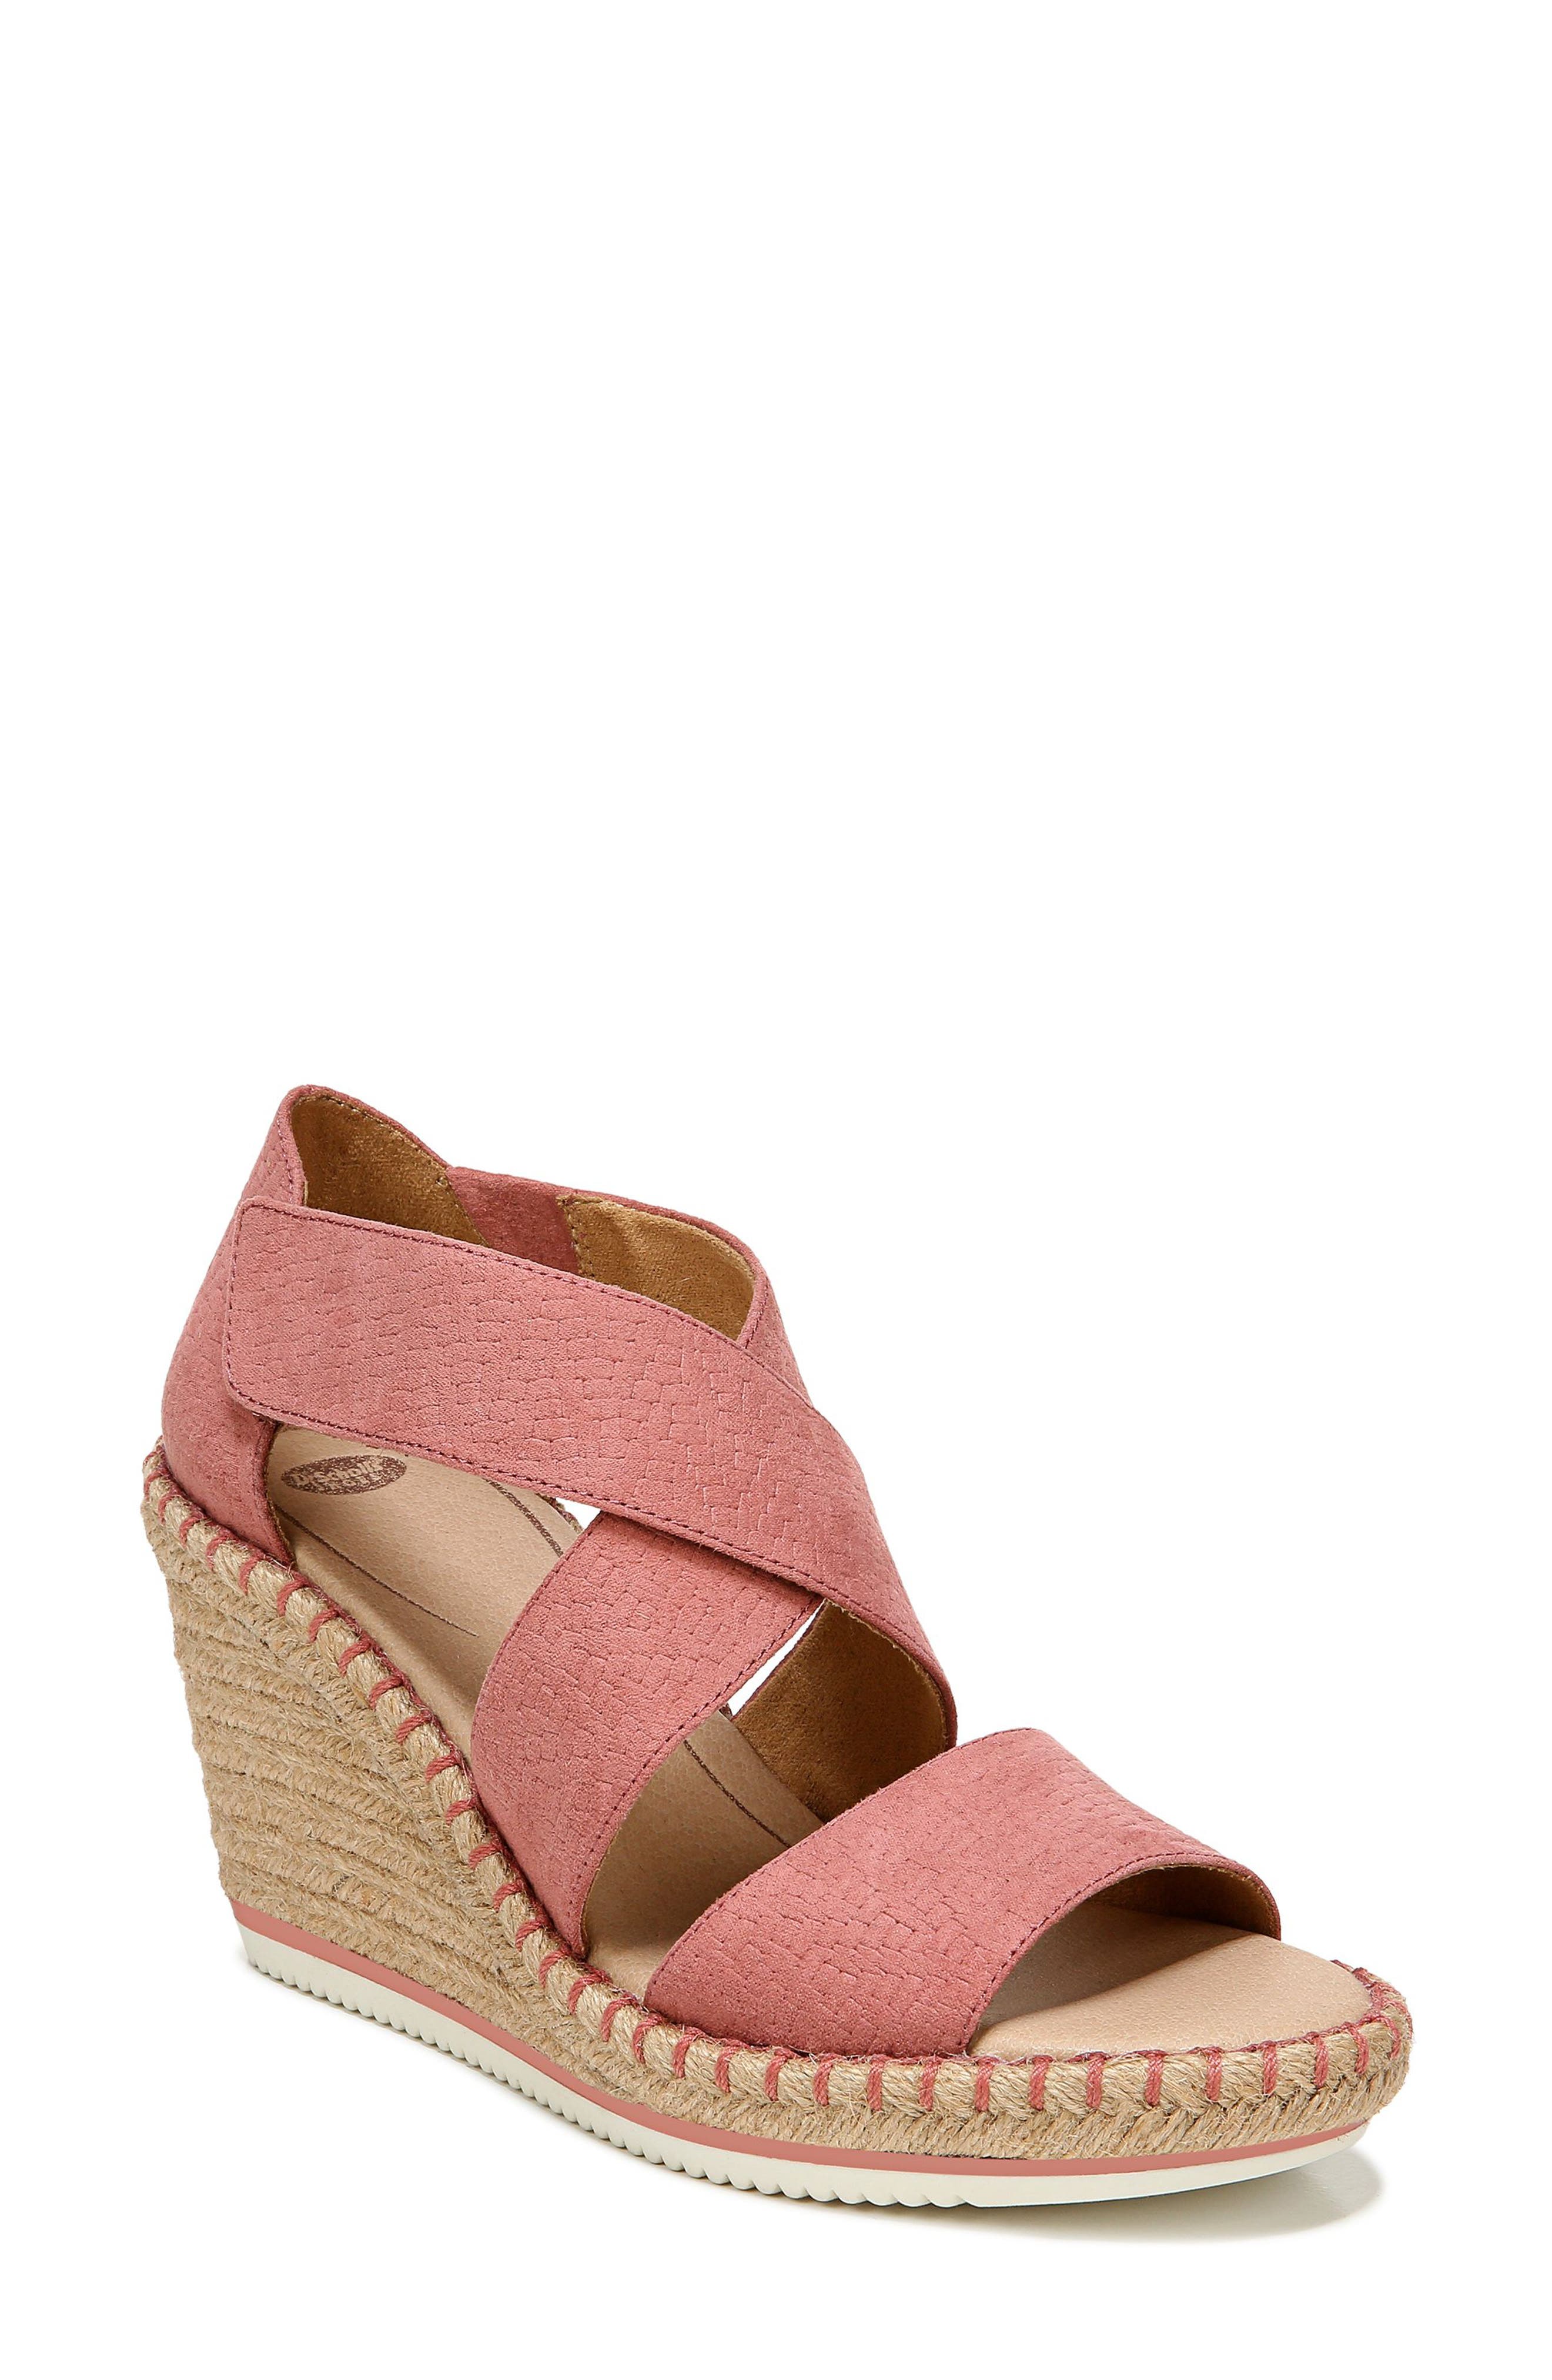 Dr. Scholl's | Vacay Wedge Sandal 